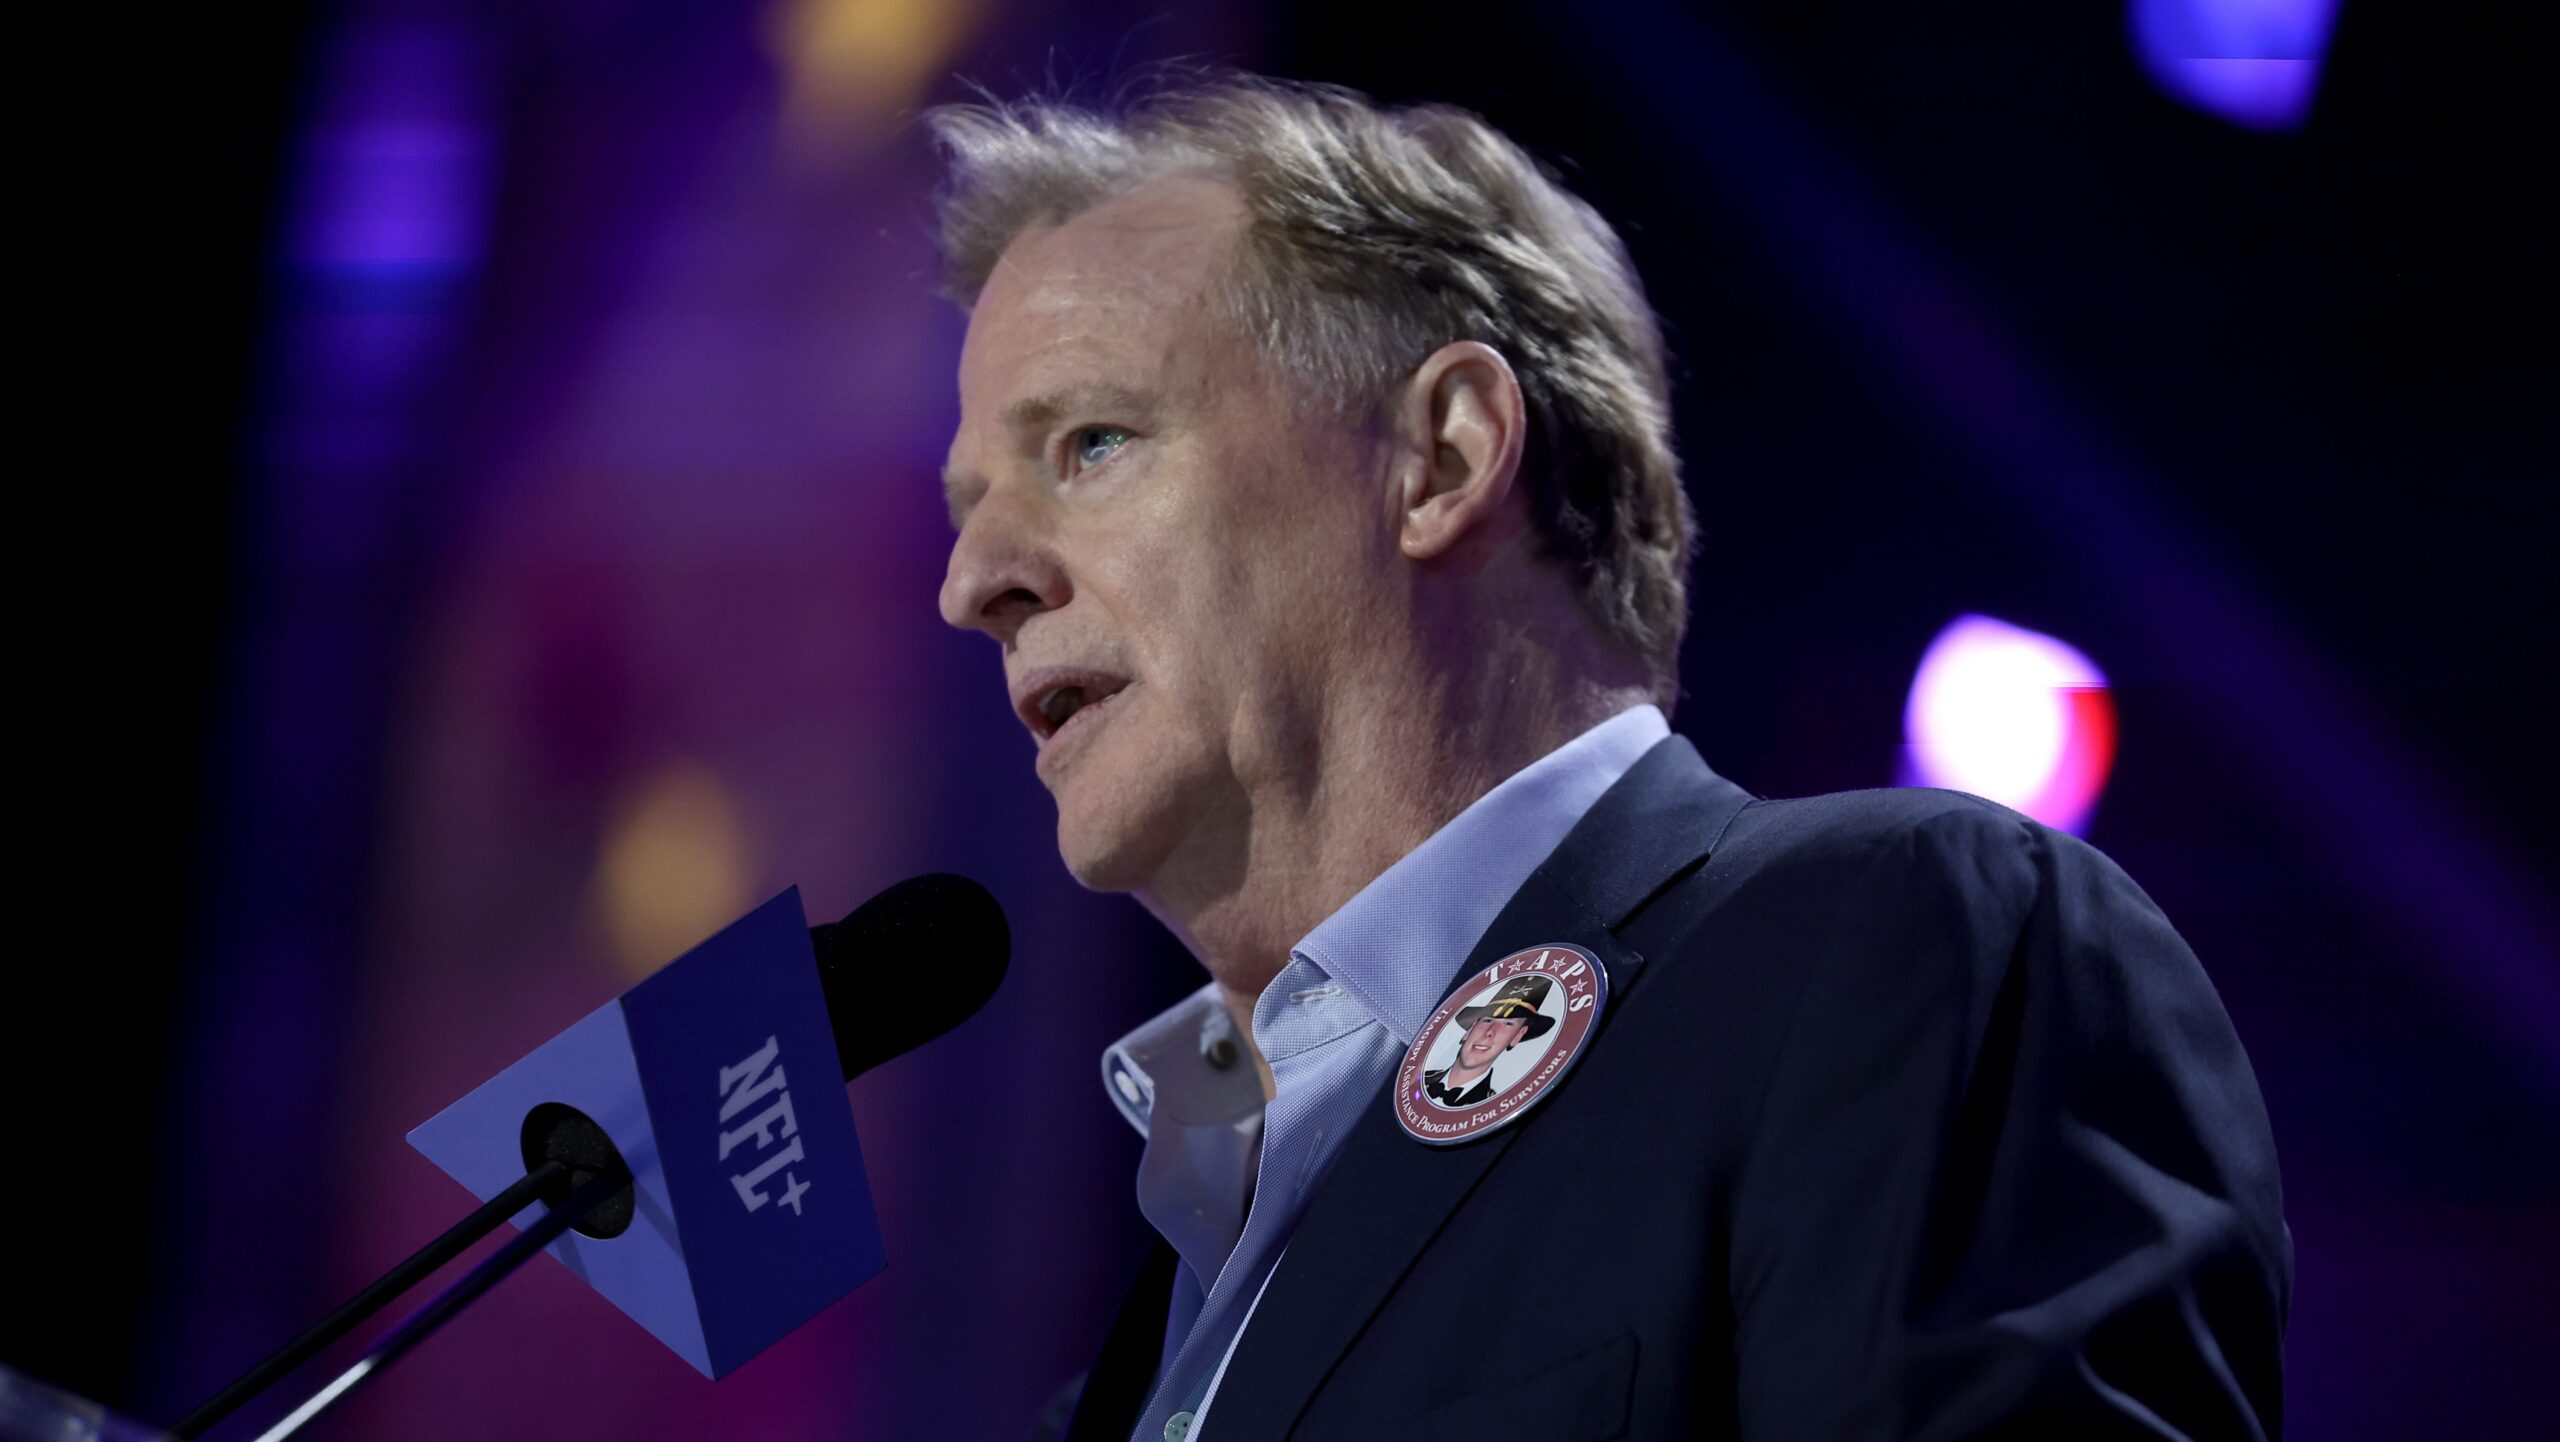 changes-in-the-nfl?:-roger-goodell-bets-on-a-season-with-18-games